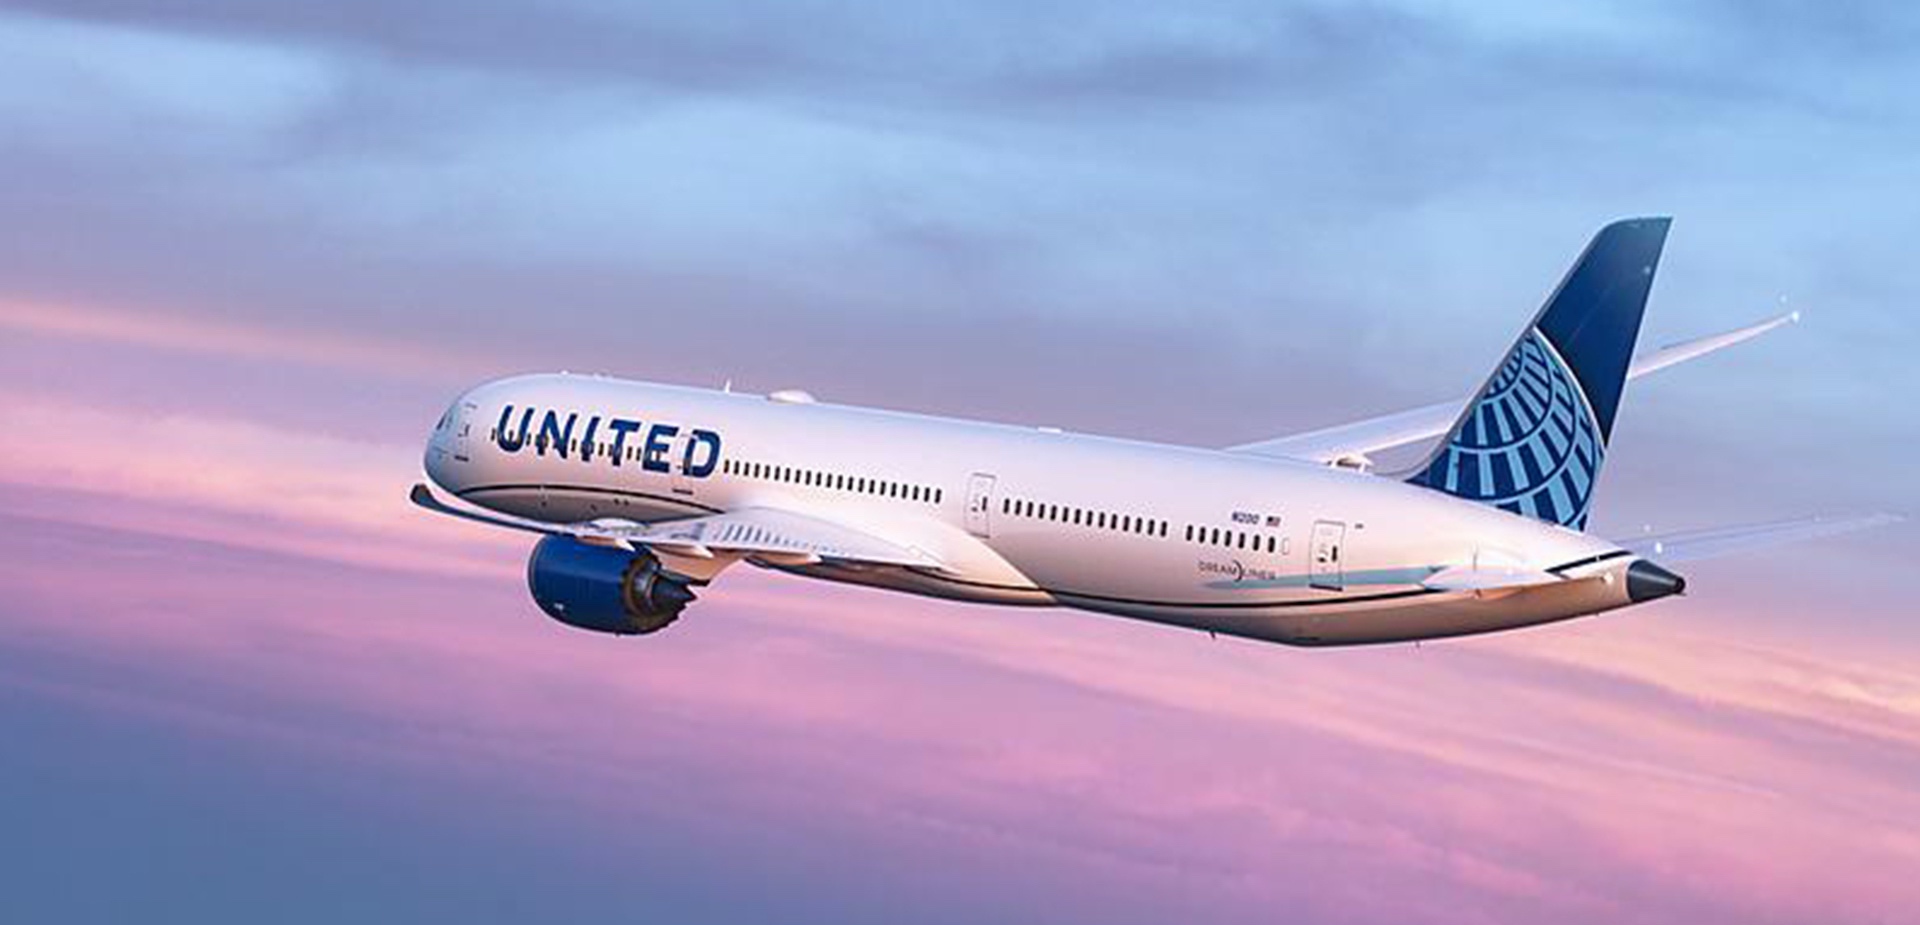 The Future of Flying with United Airlines